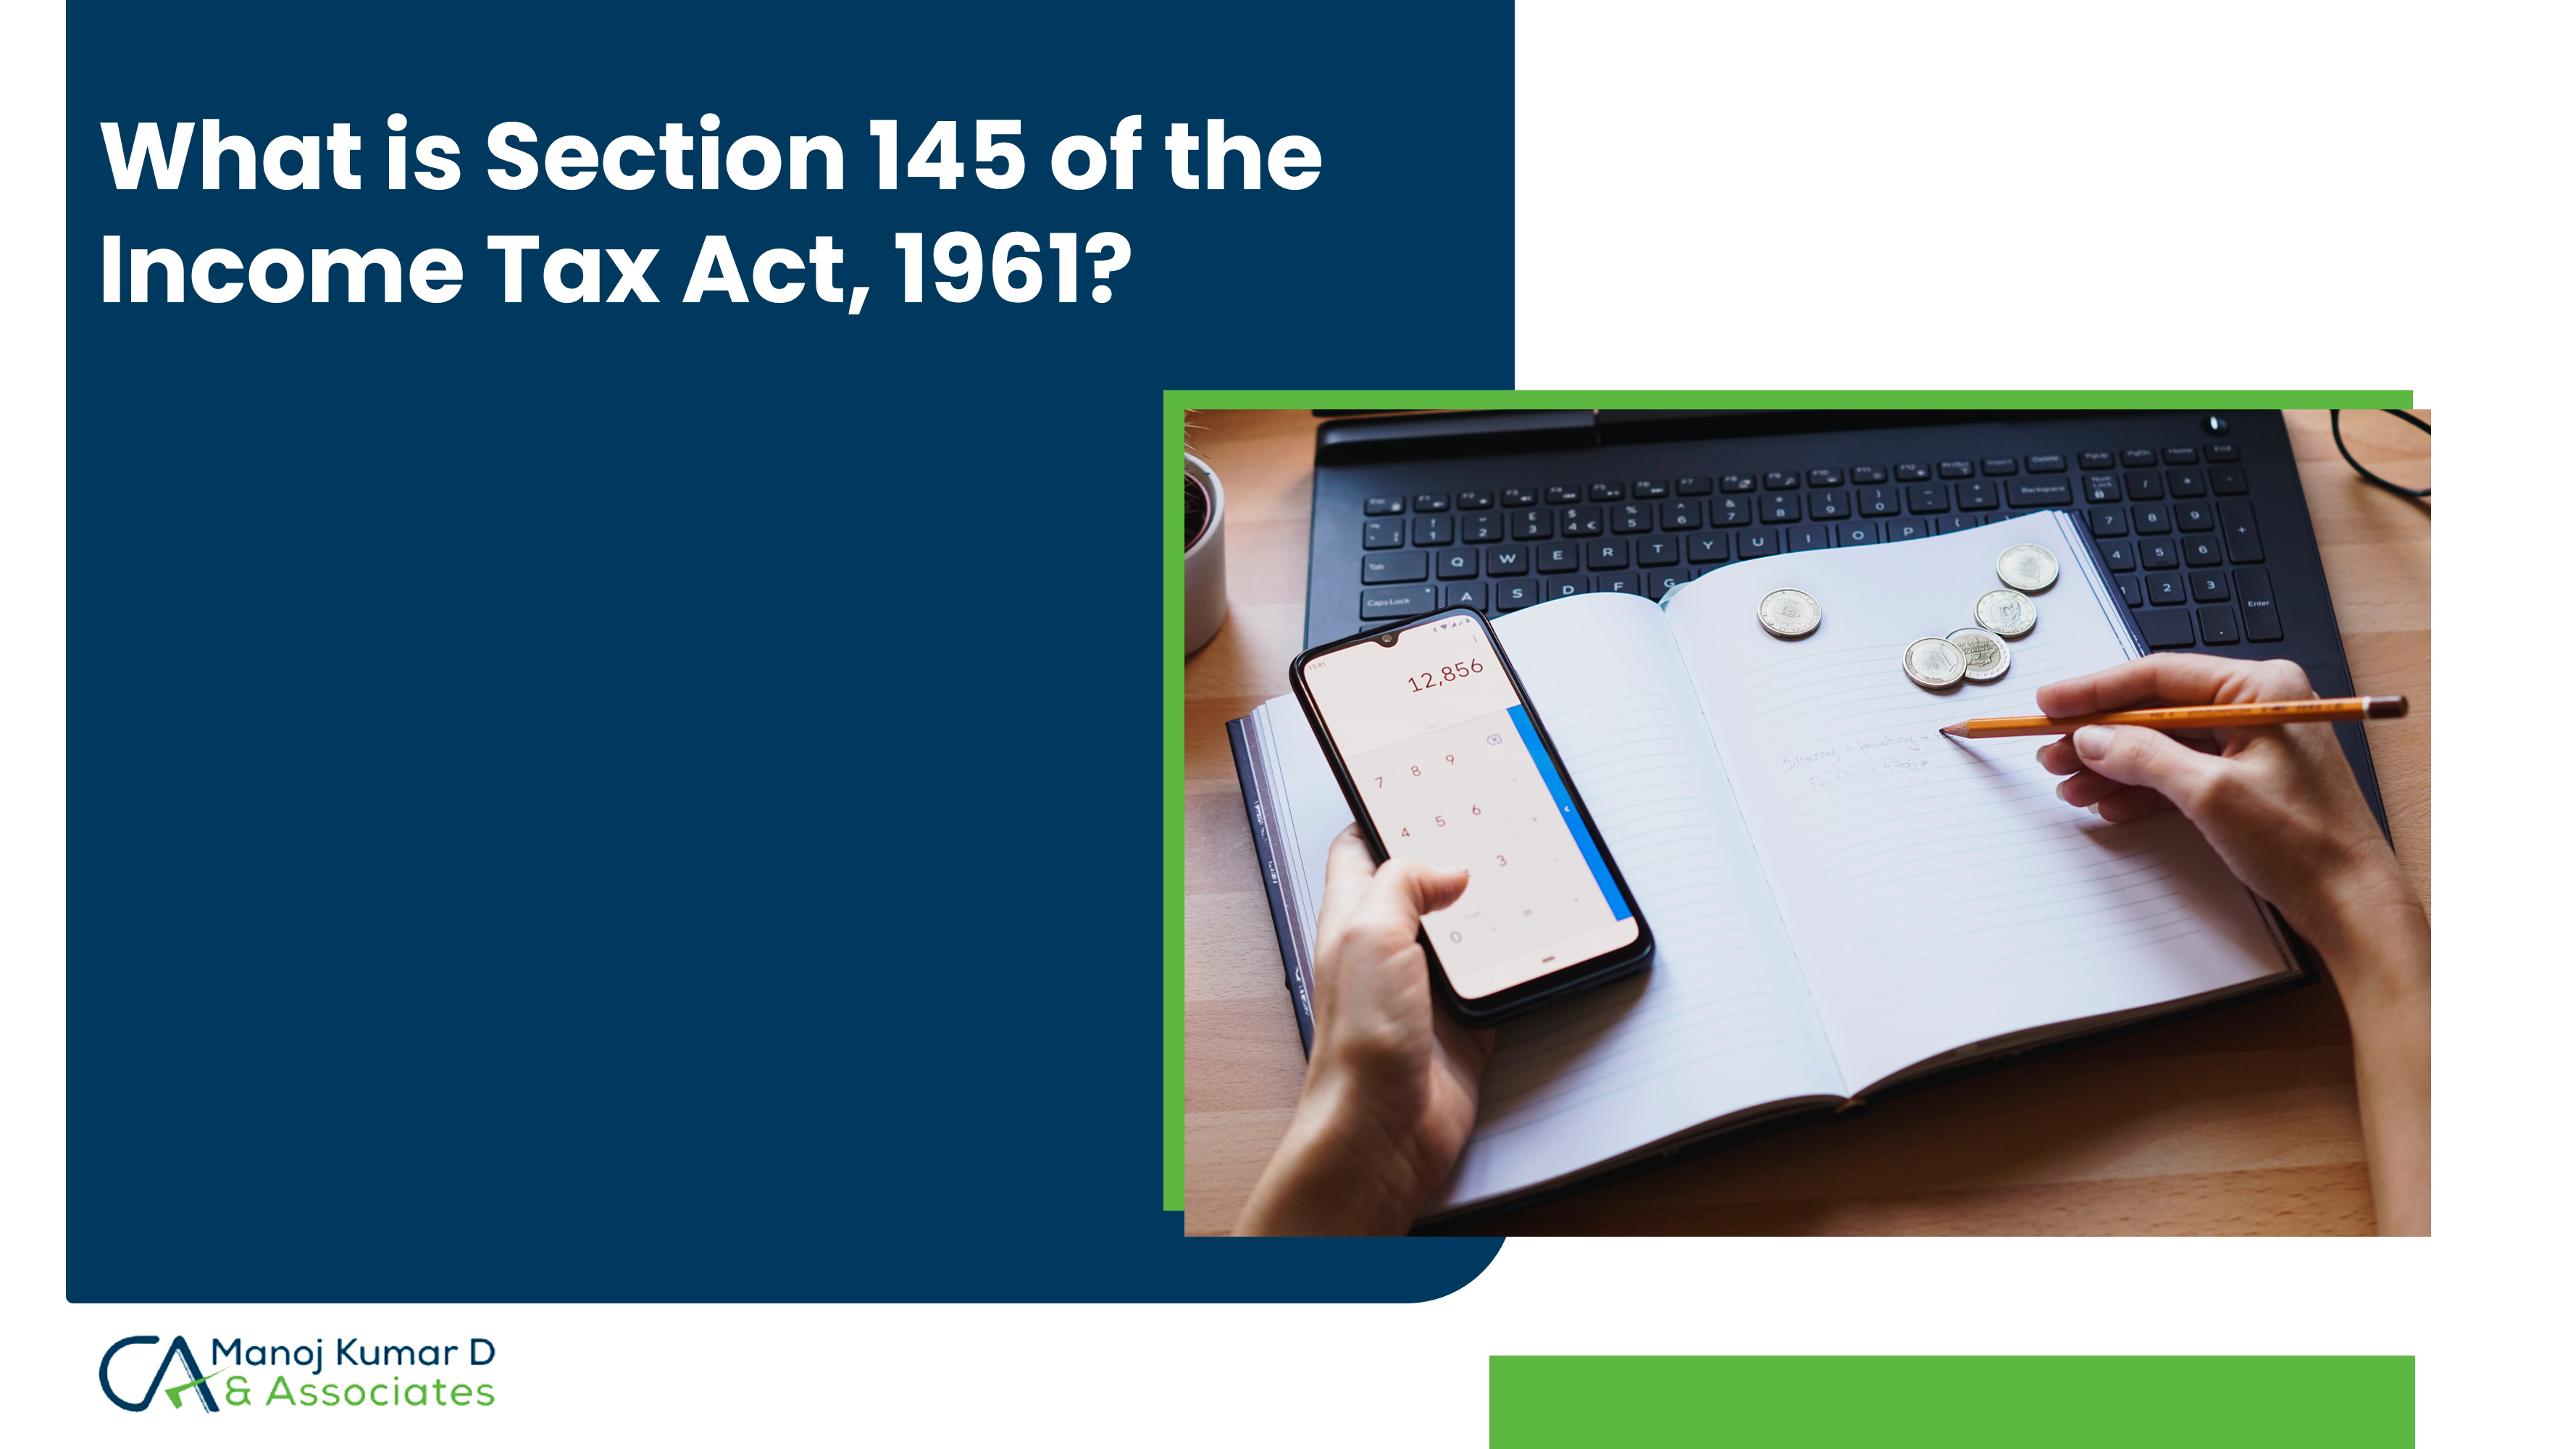 Section 145 of the Income Tax Act, 1961?